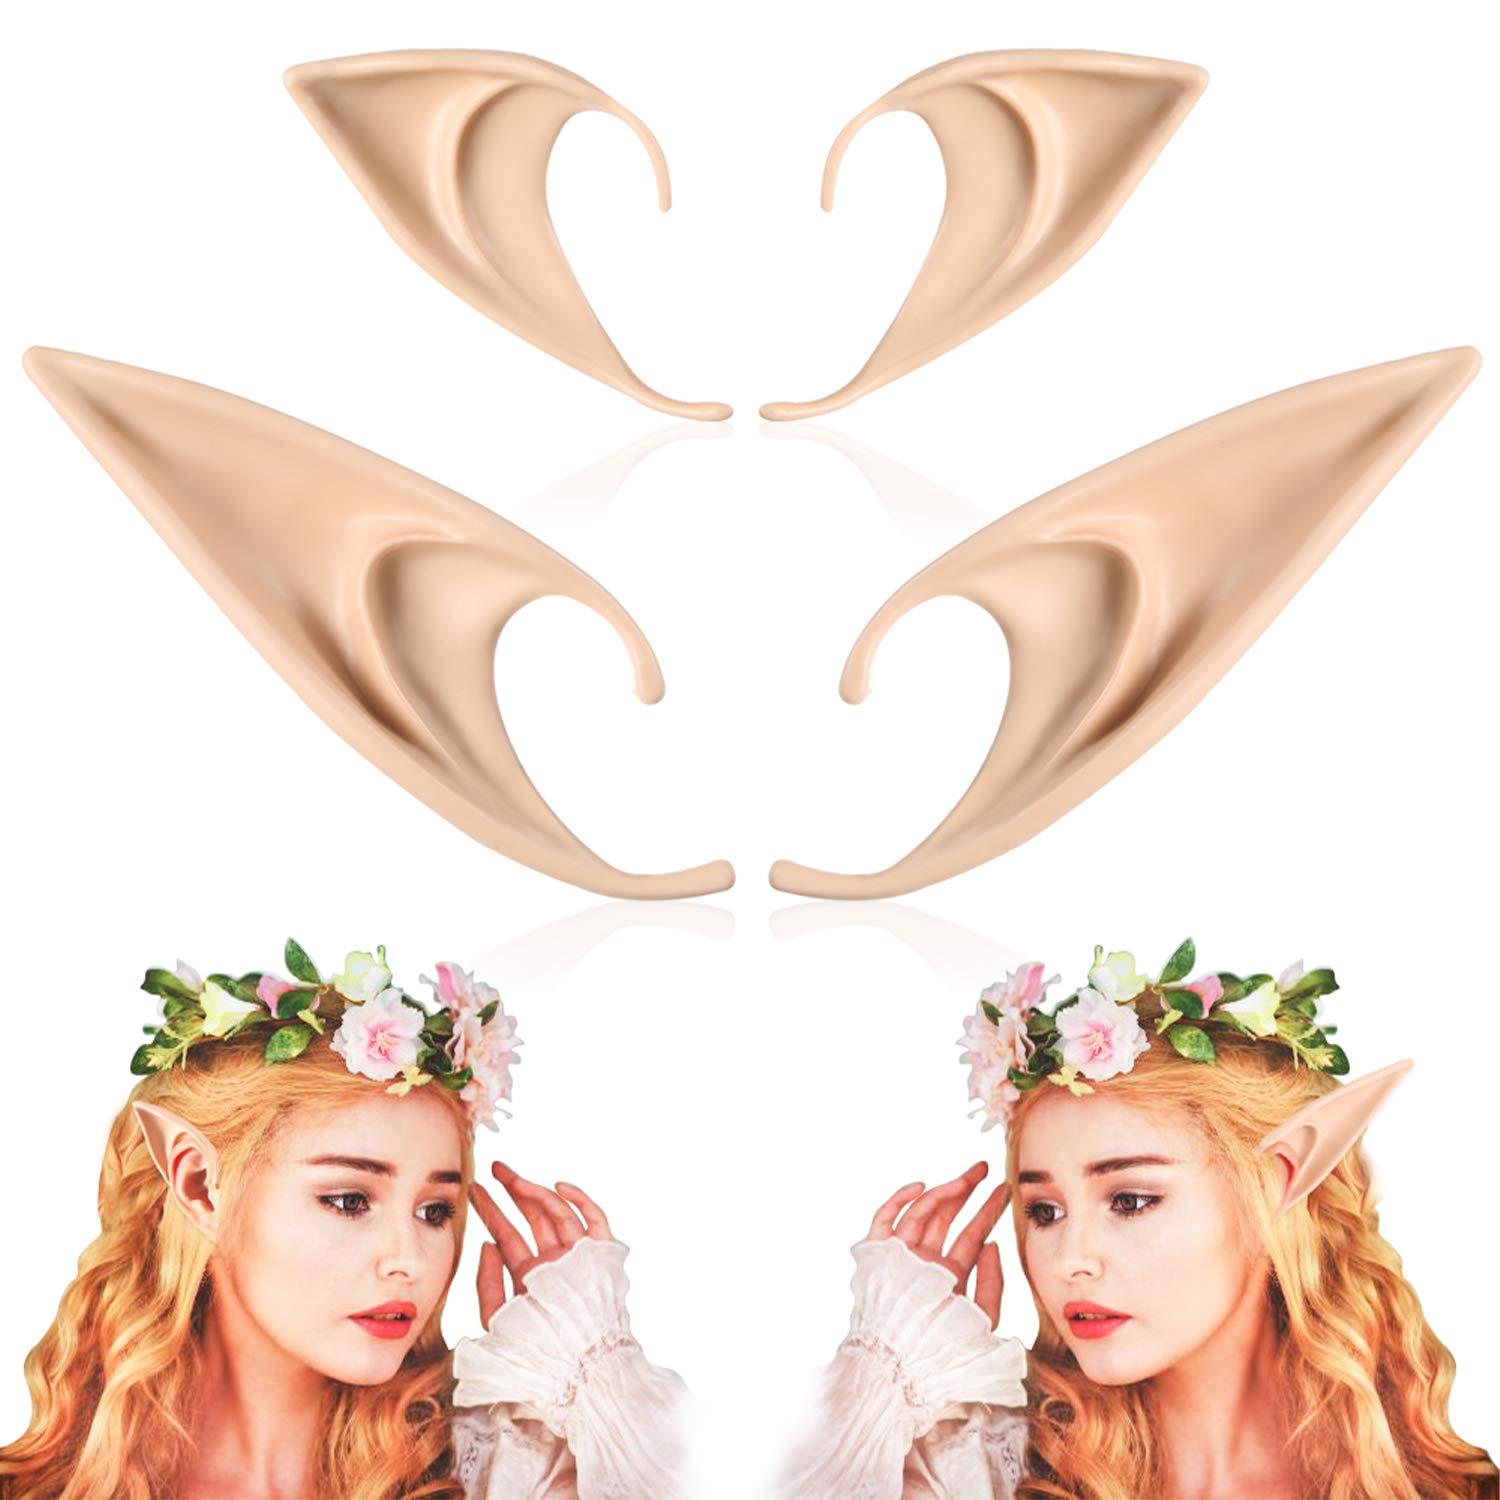 

2 Pairs Of Elf Ears - Mid To Long Role-playing Elf Ears With Soft Pointed Tips For Anime Party Attire, Makeup, Camouflage Accessories, Halloween Elf Vampire Elf Ears